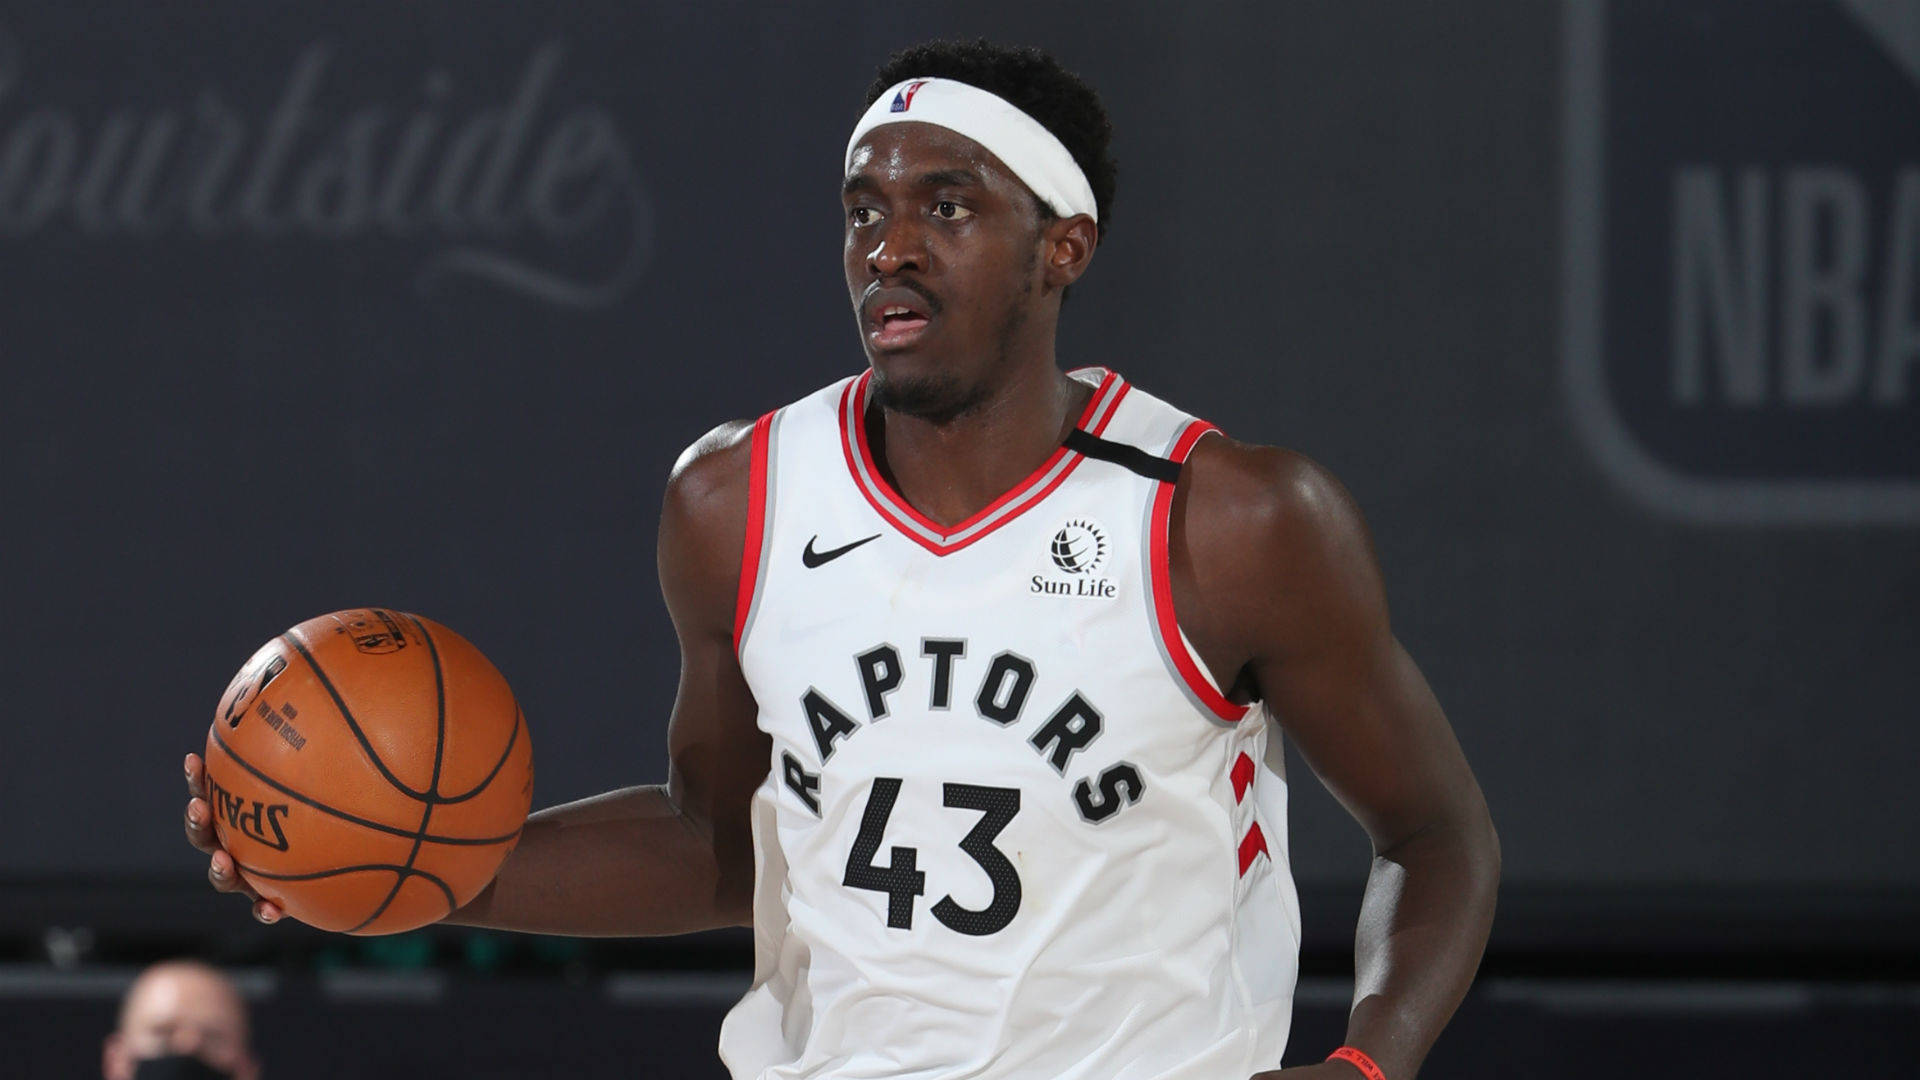 Pascal Siakam In White Jersey Background